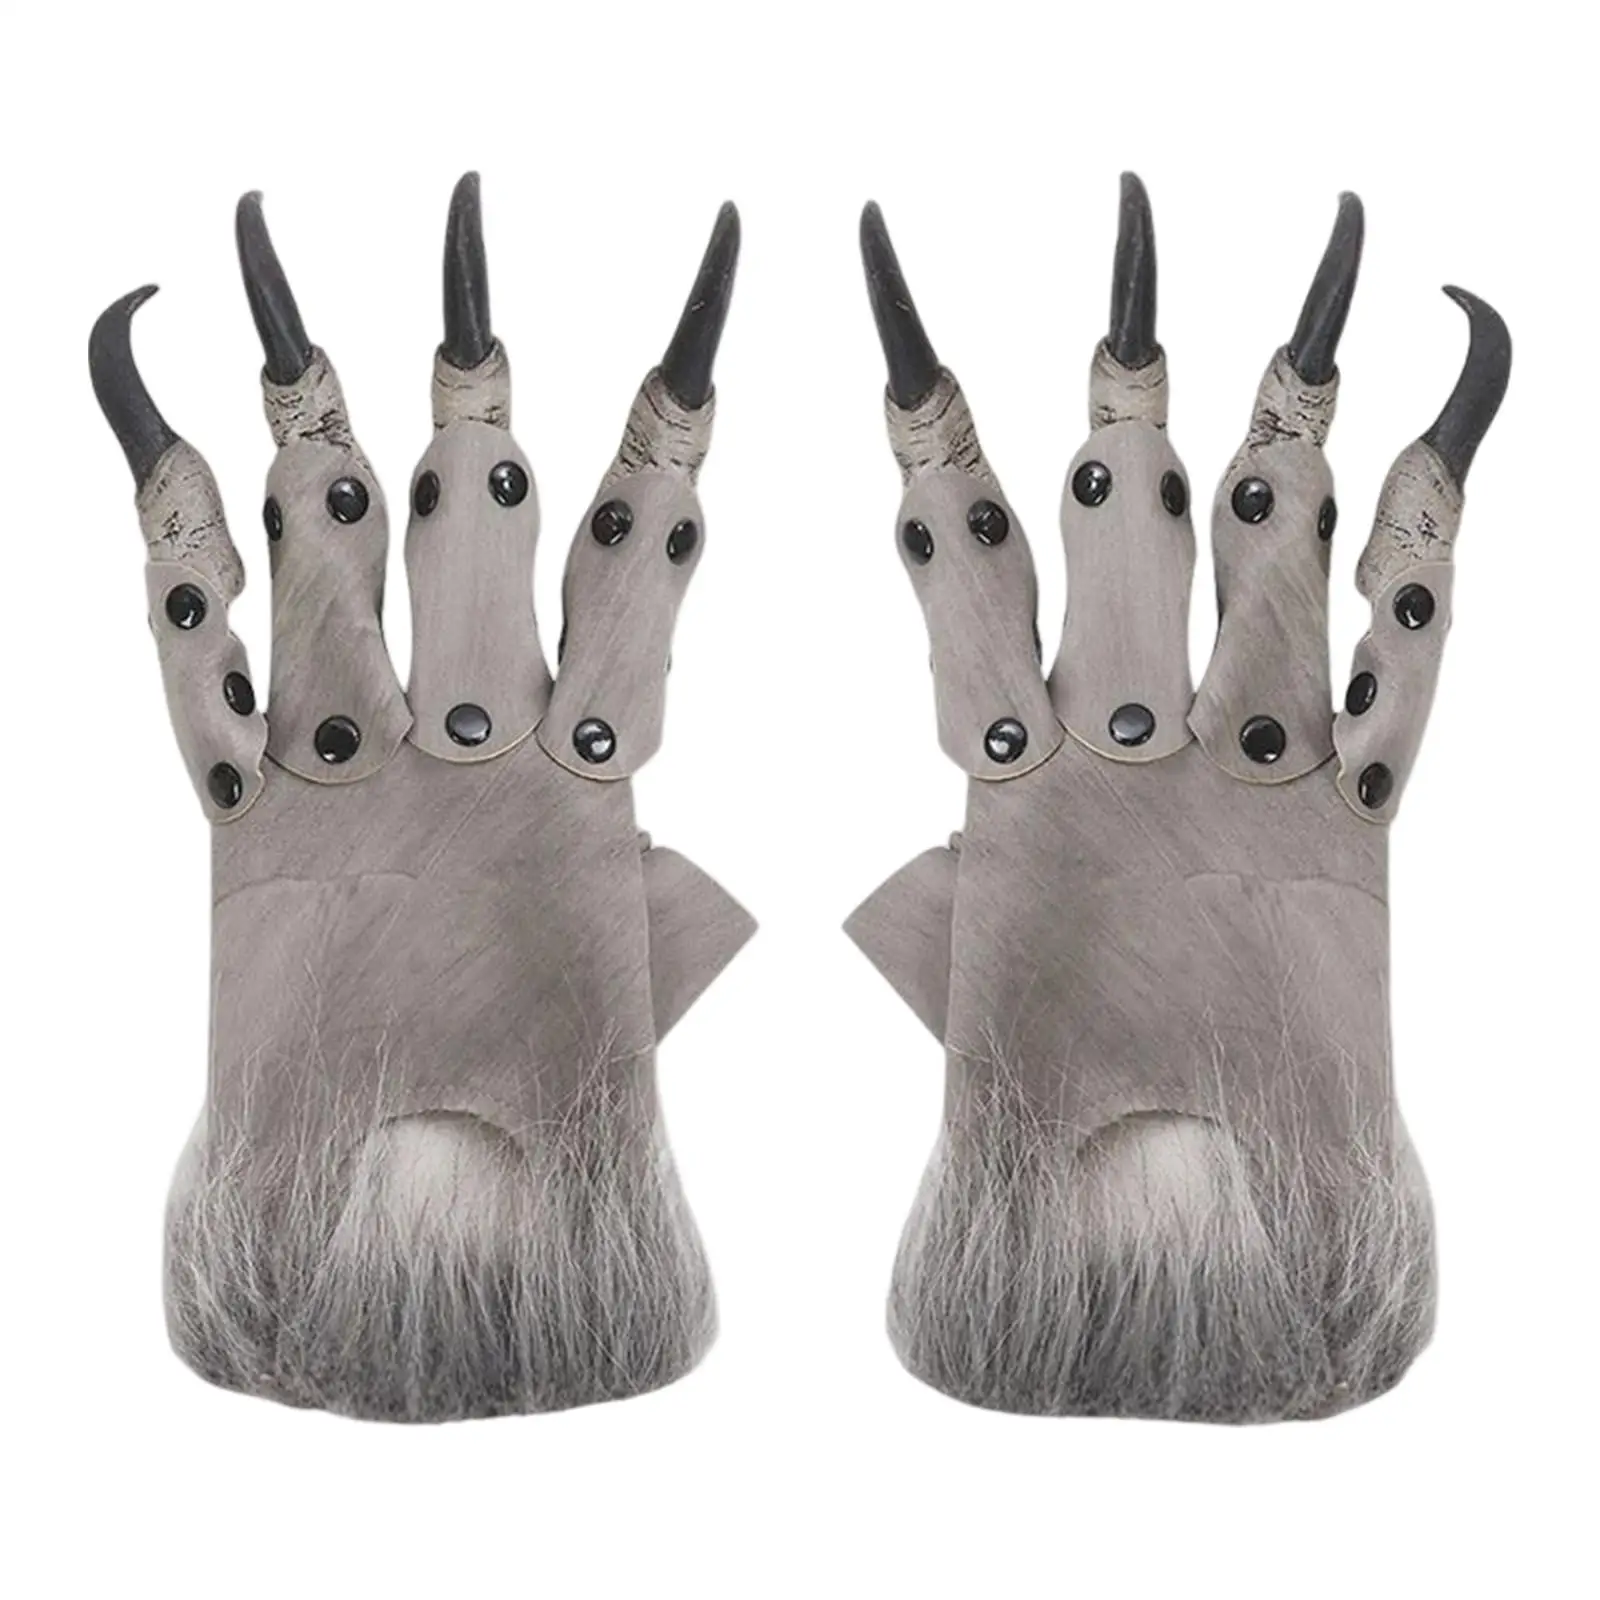 Pair Halloween Dragon Glove Costume Claw Fingernails Mitts Gift Dress up Monster Hands Paws for Festival Cosplay Props Unisex